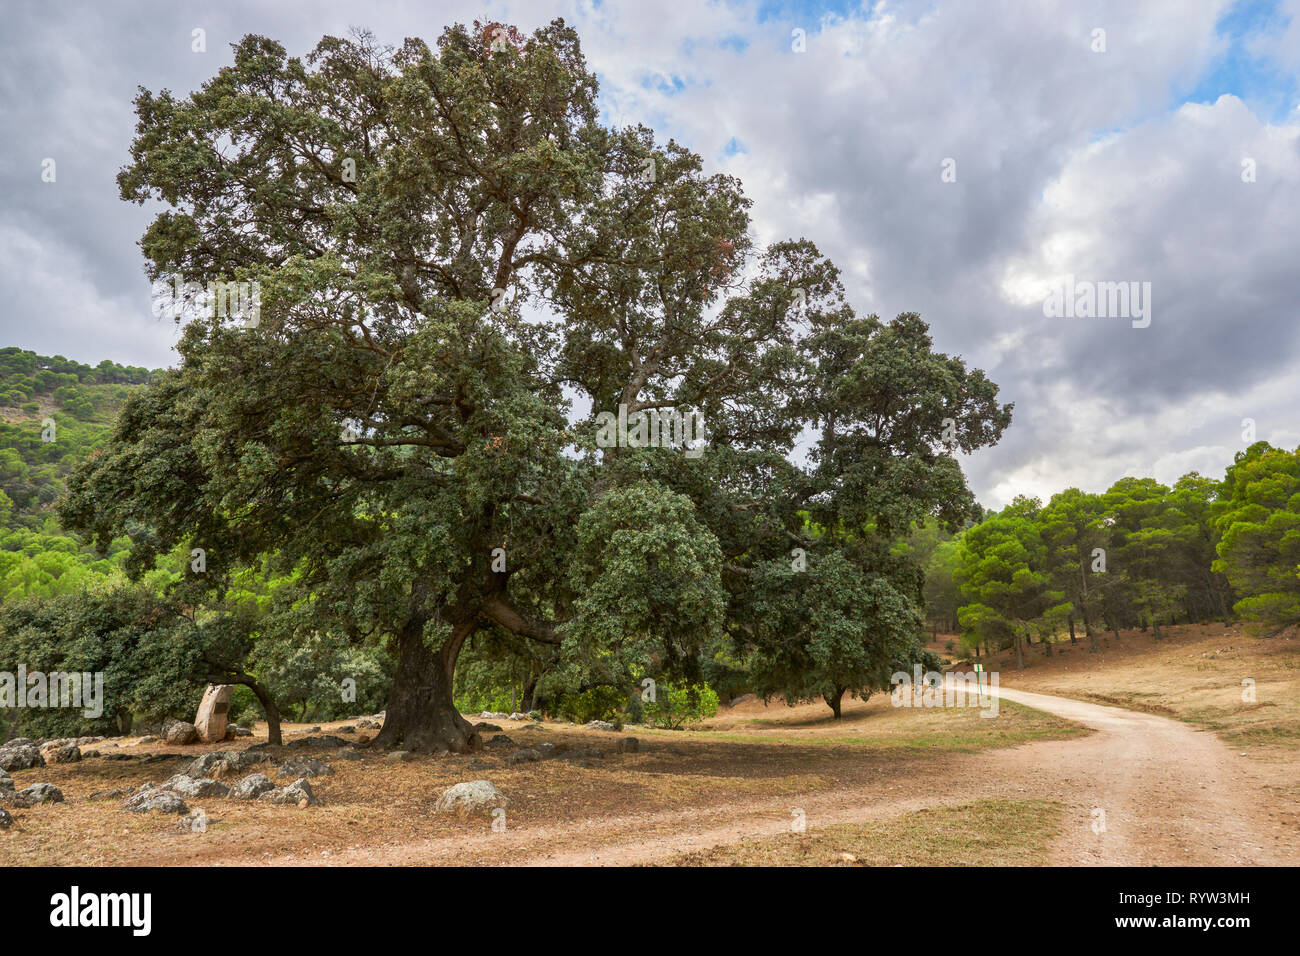 Ilex in the area El Convento. Sierra de las Nieves Natural Park. Located in the province of Malaga. Spain. Billed as Biosphere Reserve Stock Photo